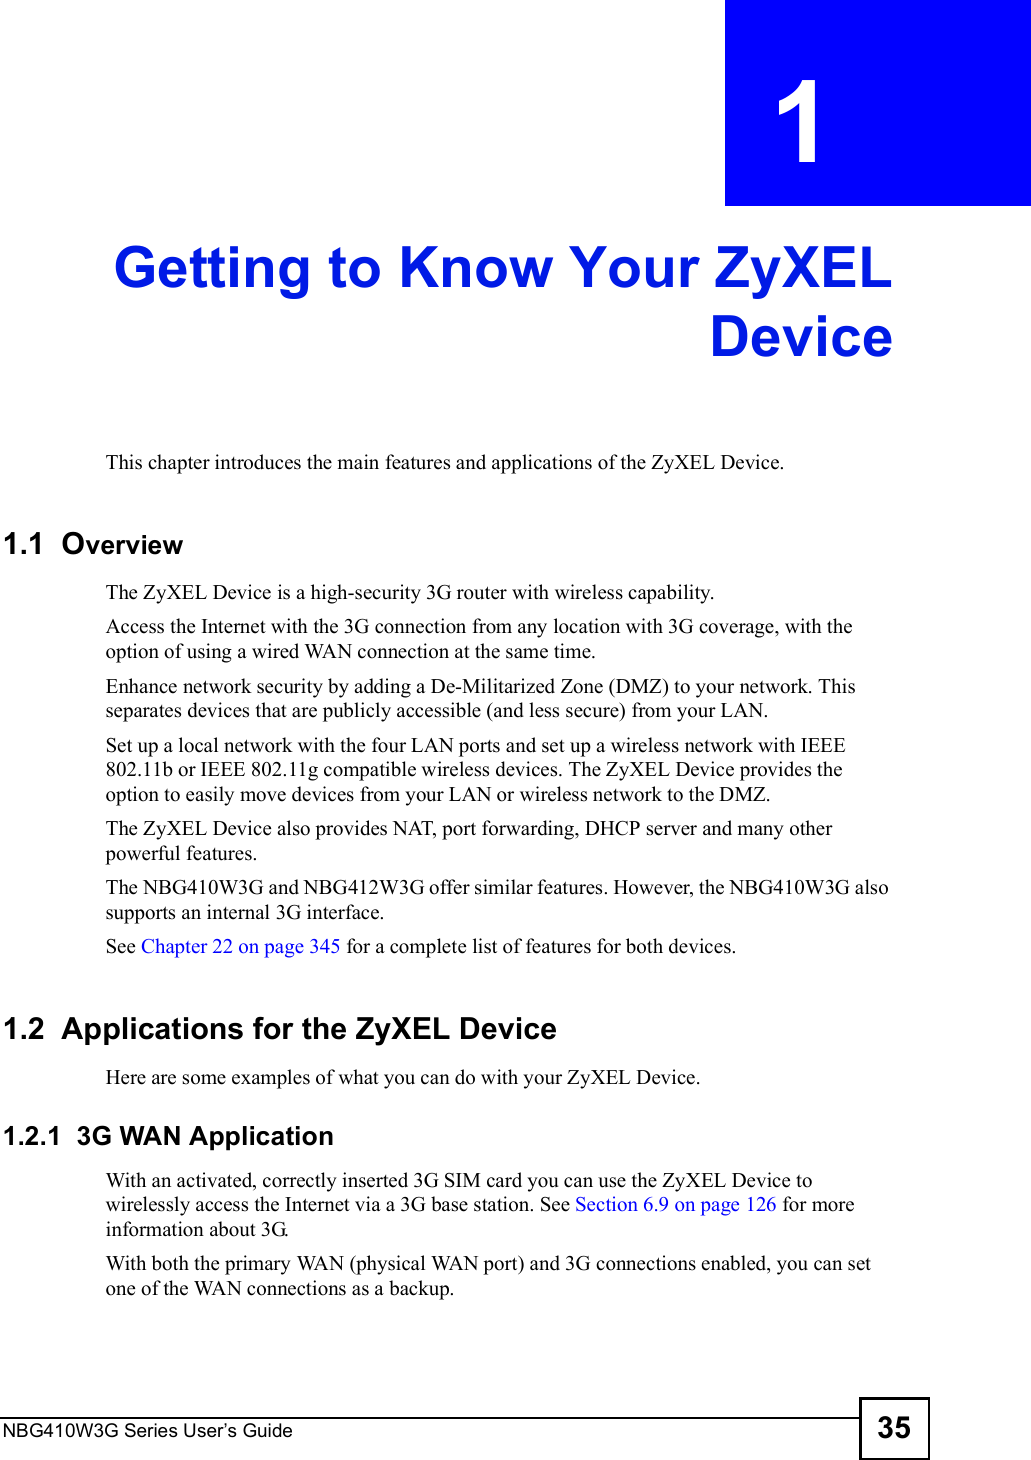 NBG410W3G Series User s Guide 35CHAPTER  1 Getting to Know Your ZyXELDeviceThis chapter introduces the main features and applications of the ZyXEL Device.1.1  OverviewThe ZyXEL Device is a high-security 3G router with wireless capability. Access the Internet with the 3G connection from any location with 3G coverage, with the option of using a wired WAN connection at the same time. Enhance network security by adding a De-Militarized Zone (DMZ) to your network. This separates devices that are publicly accessible (and less secure) from your LAN. Set up a local network with the four LAN ports and set up a wireless network with IEEE 802.11b or IEEE 802.11g compatible wireless devices. The ZyXEL Device provides the option to easily move devices from your LAN or wireless network to the DMZ. The ZyXEL Device also provides NAT, port forwarding, DHCP server and many other powerful features.The NBG410W3G and NBG412W3G offer similar features. However, the NBG410W3G also supports an internal 3G interface.See Chapter 22 on page 345 for a complete list of features for both devices. 1.2  Applications for the ZyXEL Device Here are some examples of what you can do with your ZyXEL Device. 1.2.1  3G WAN Application With an activated, correctly inserted 3G SIM card you can use the ZyXEL Device to wirelessly access the Internet via a 3G base station. See Section 6.9 on page 126 for more information about 3G.With both the primary WAN (physical WAN port) and 3G connections enabled, you can set one of the WAN connections as a backup.